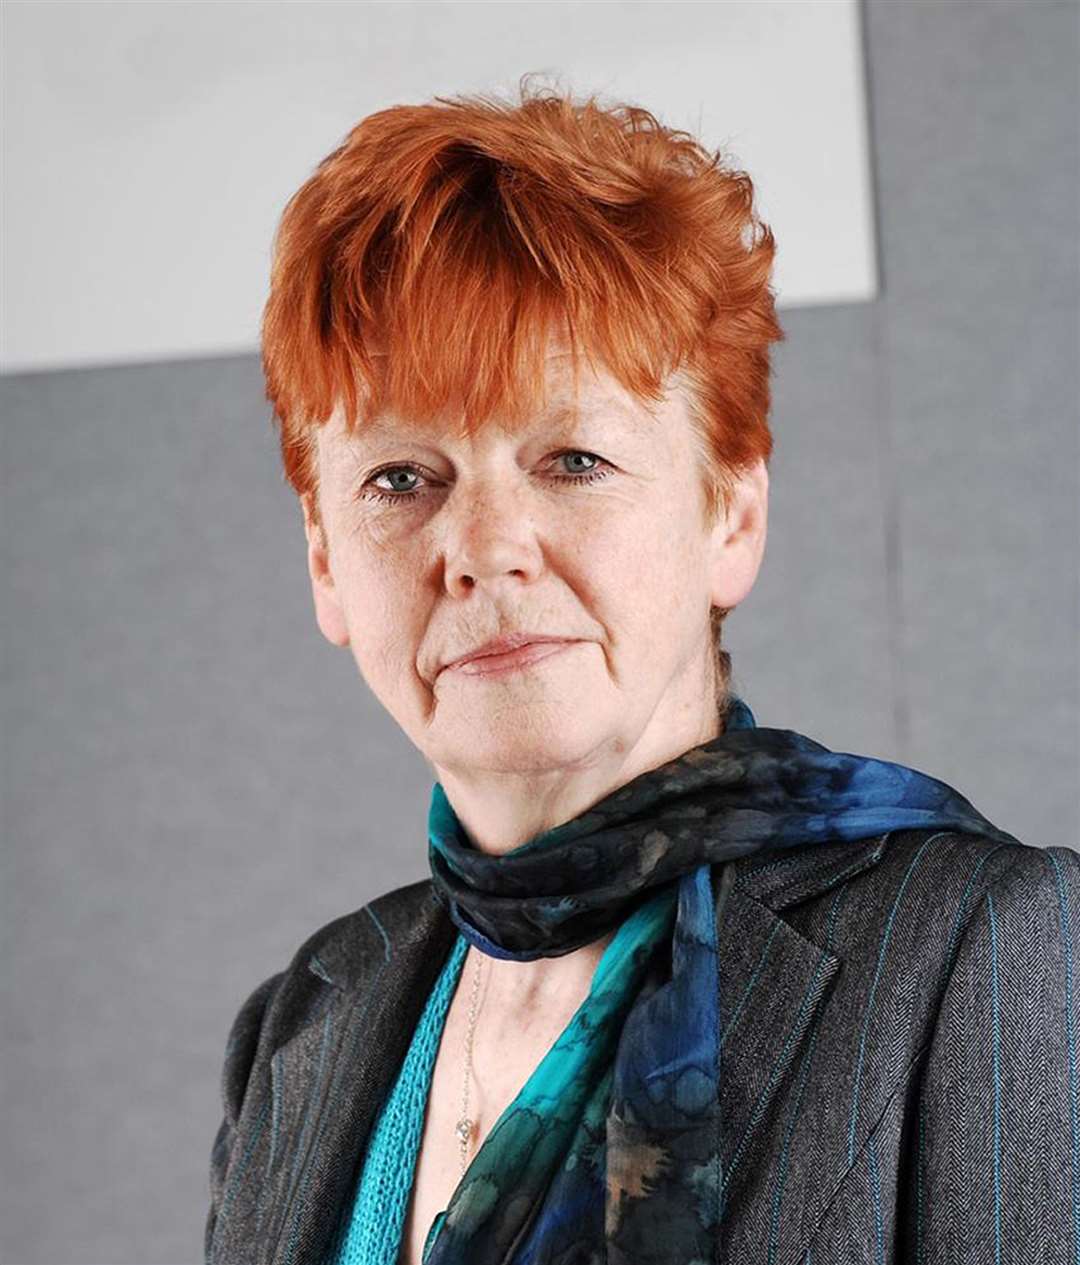 Victim’s Commissioner Dame Vera Baird called for more creative thinking about how to help people experiencing domestic abuse during the lockdown (Office of Police & Crime Commissioner for Northumbria/PA)